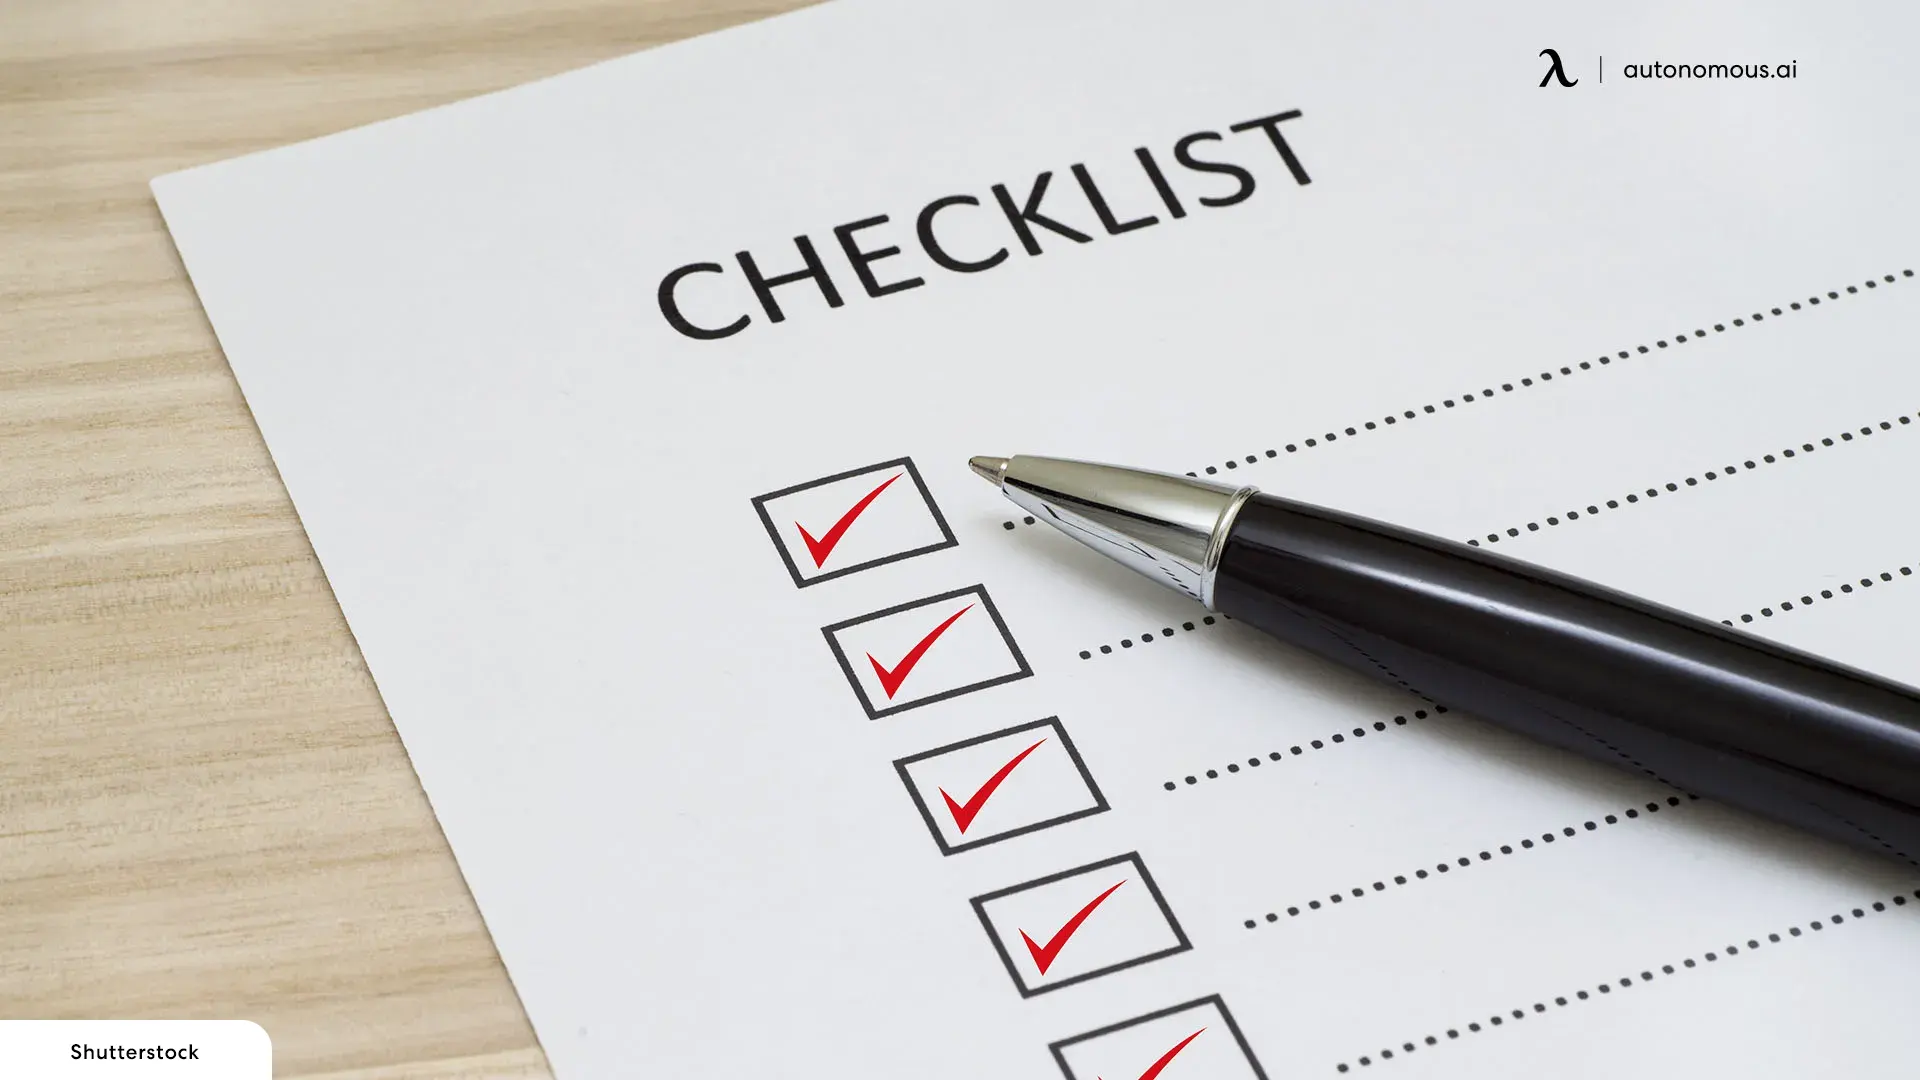 Have a Checklist for work from home space